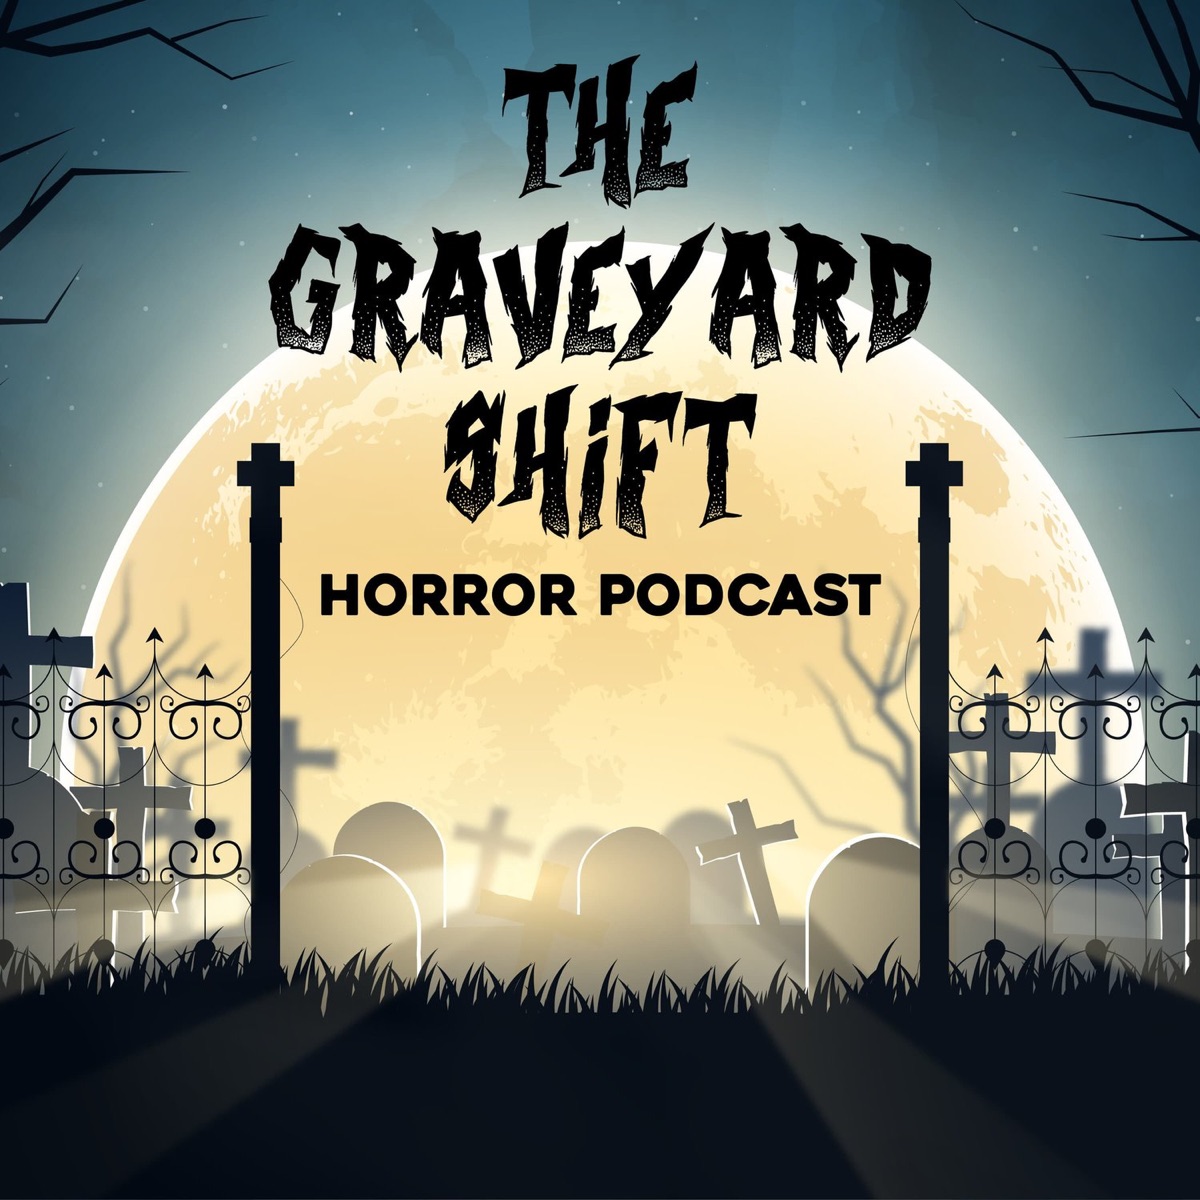 Where Did the Graveyard Shift Come From?